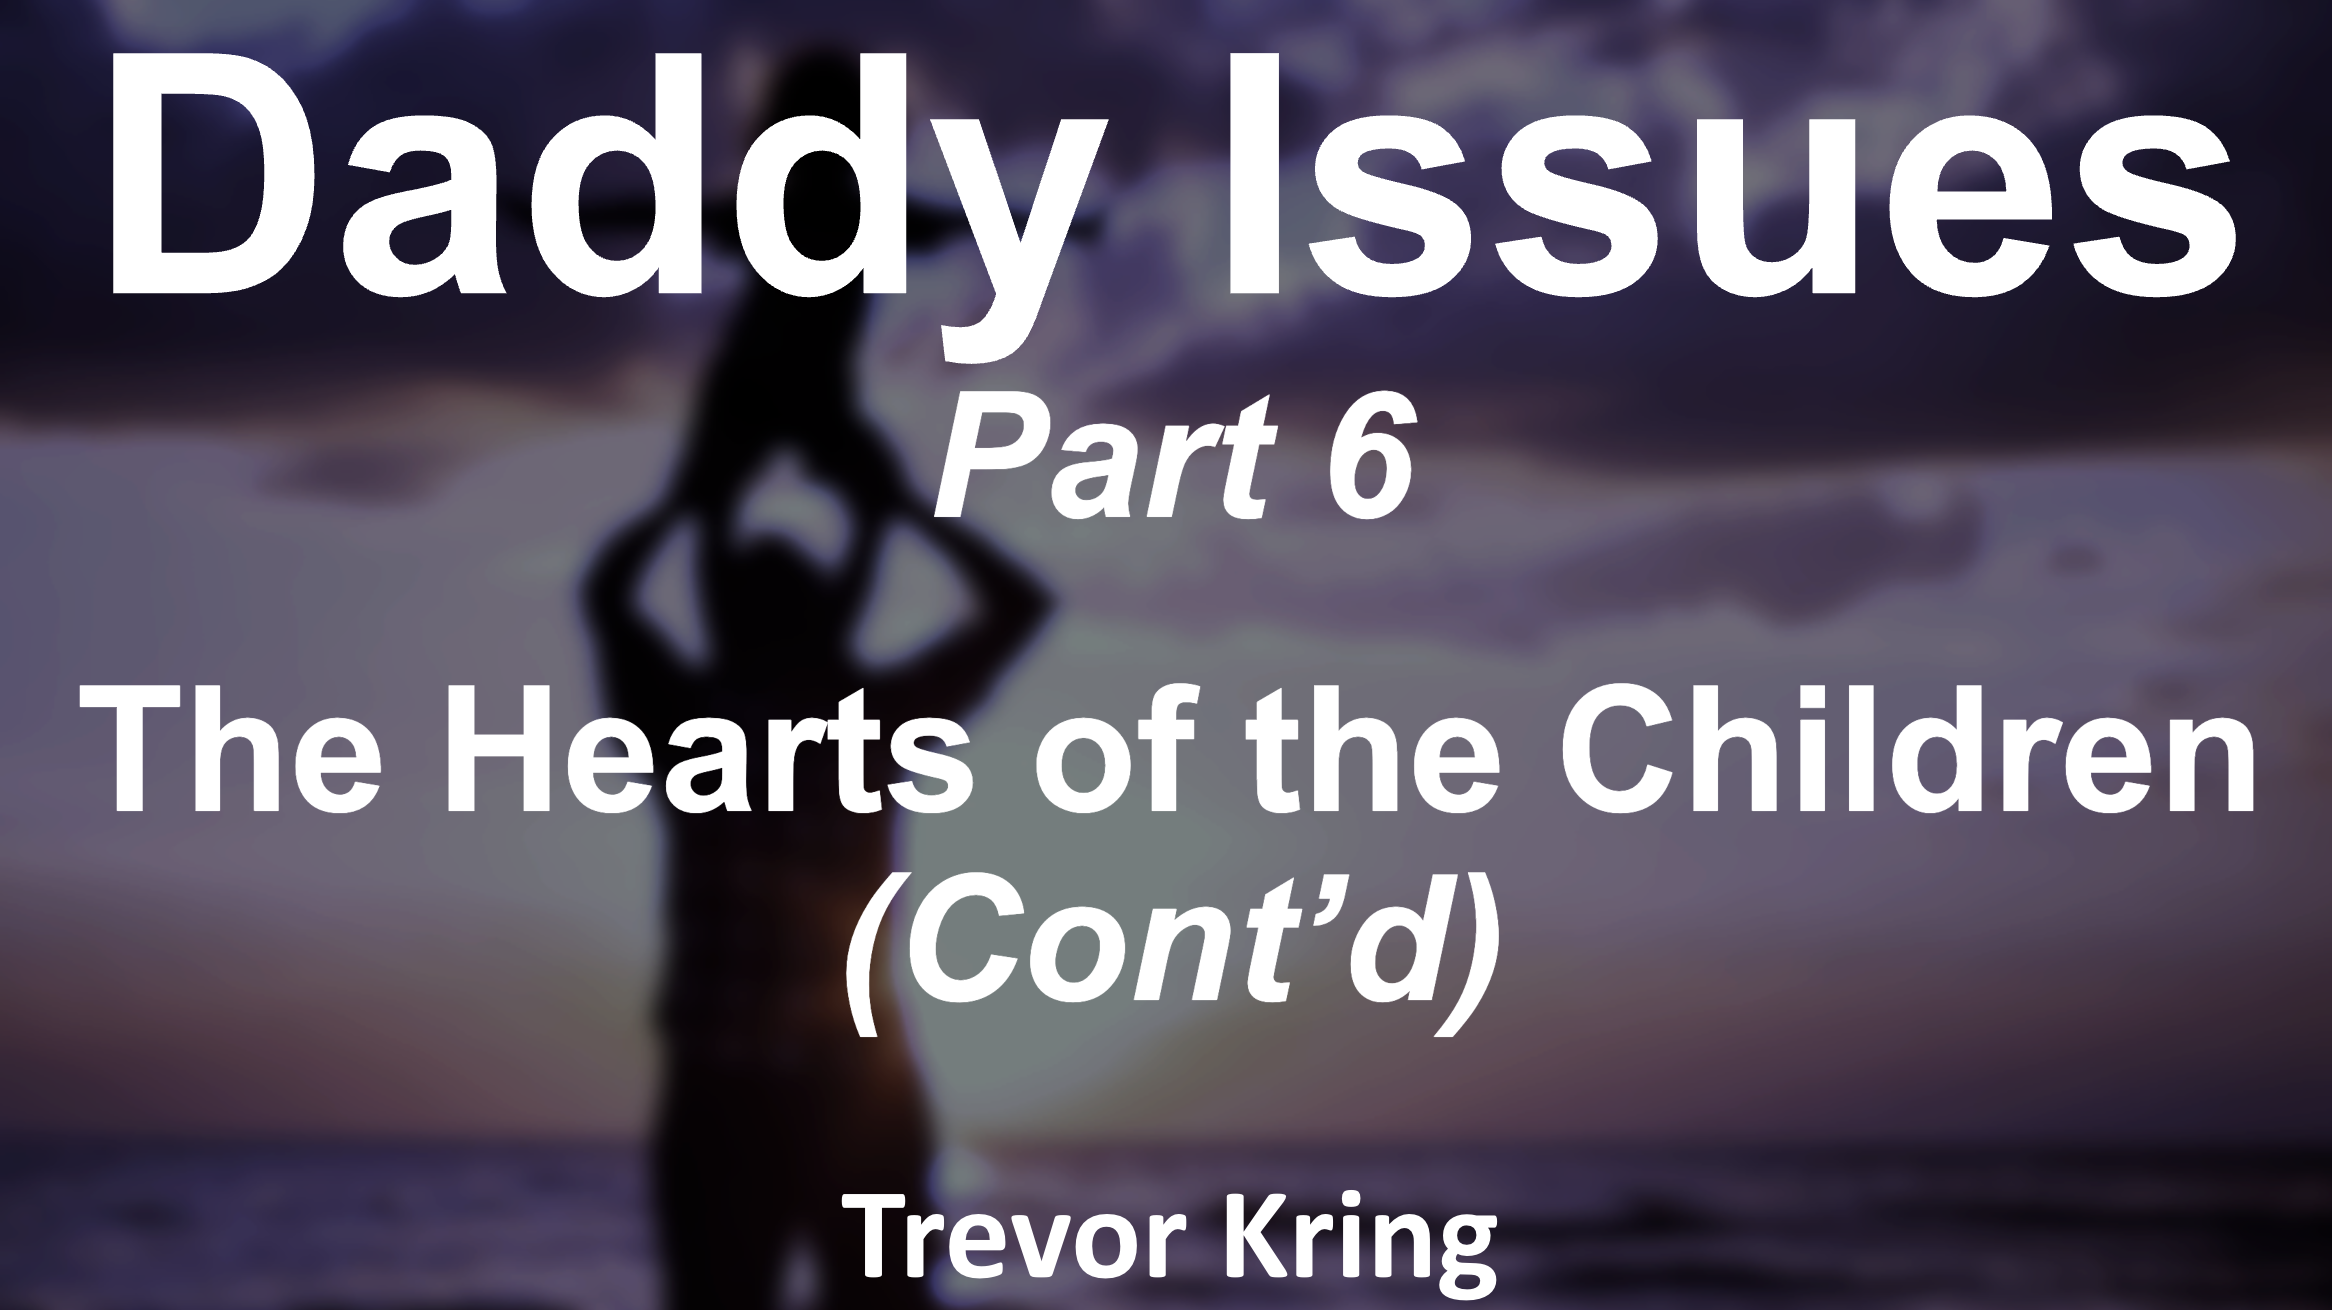 Daddy Issues - Part 6